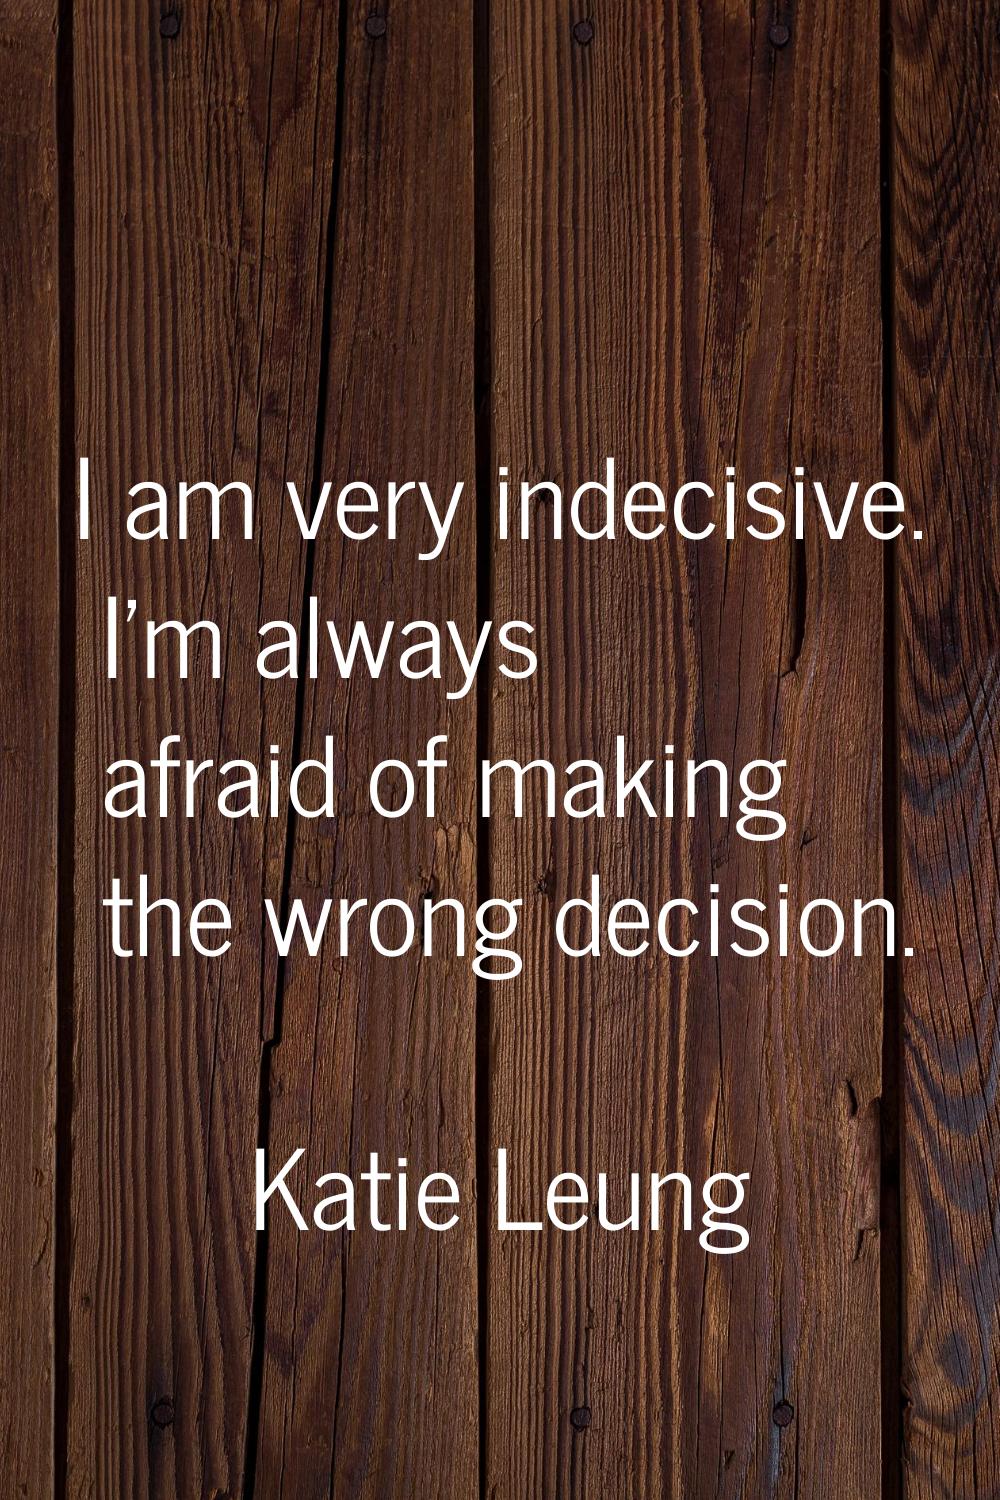 I am very indecisive. I'm always afraid of making the wrong decision.